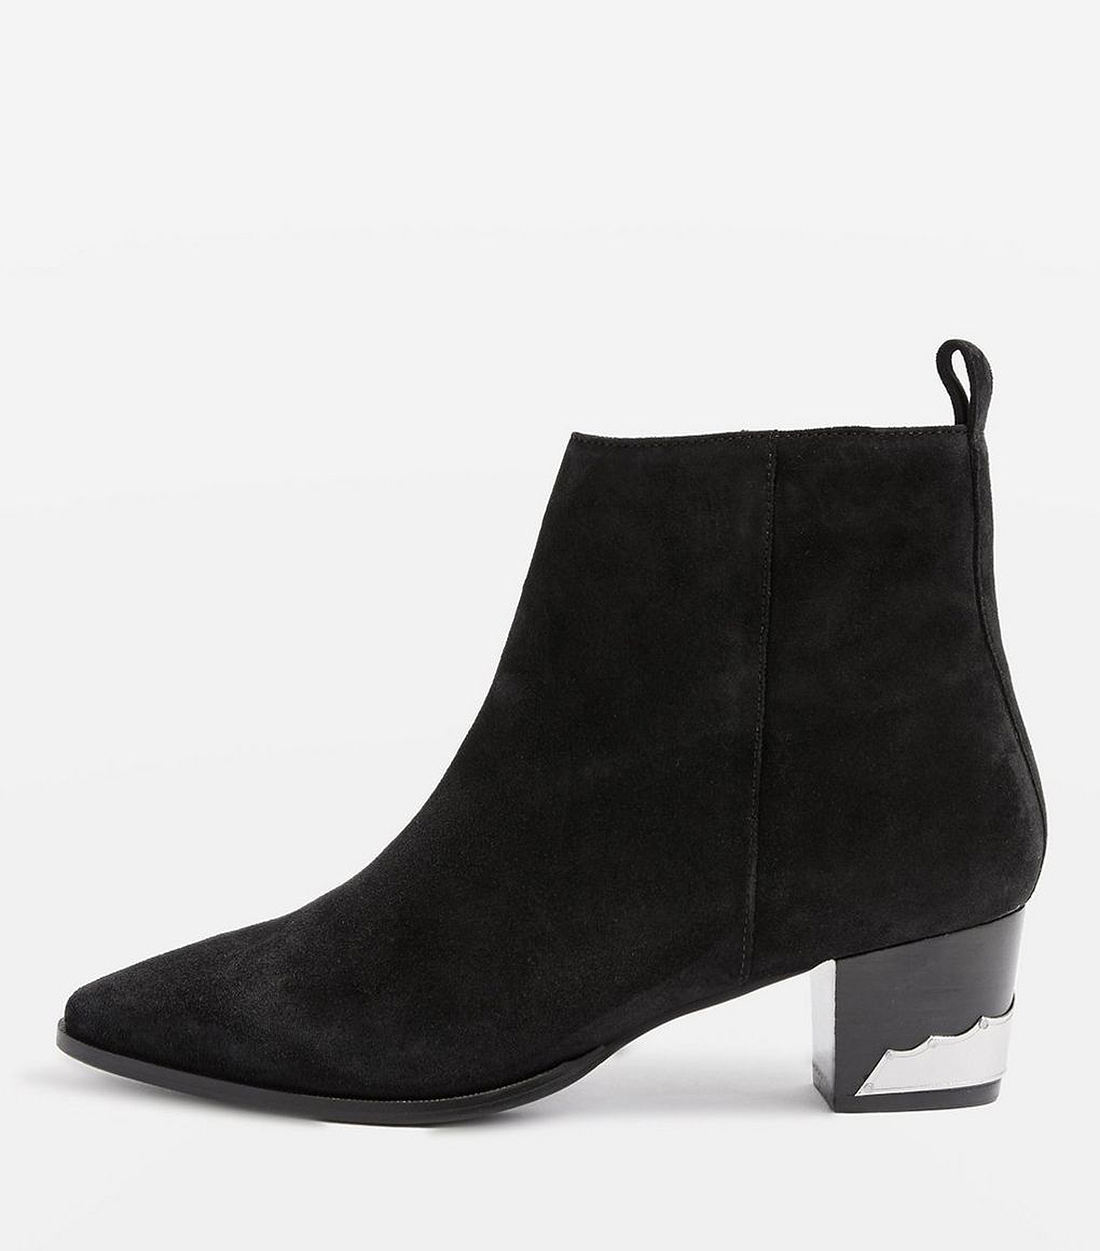 The Best Topshop Shoes for Fall | Who What Wear